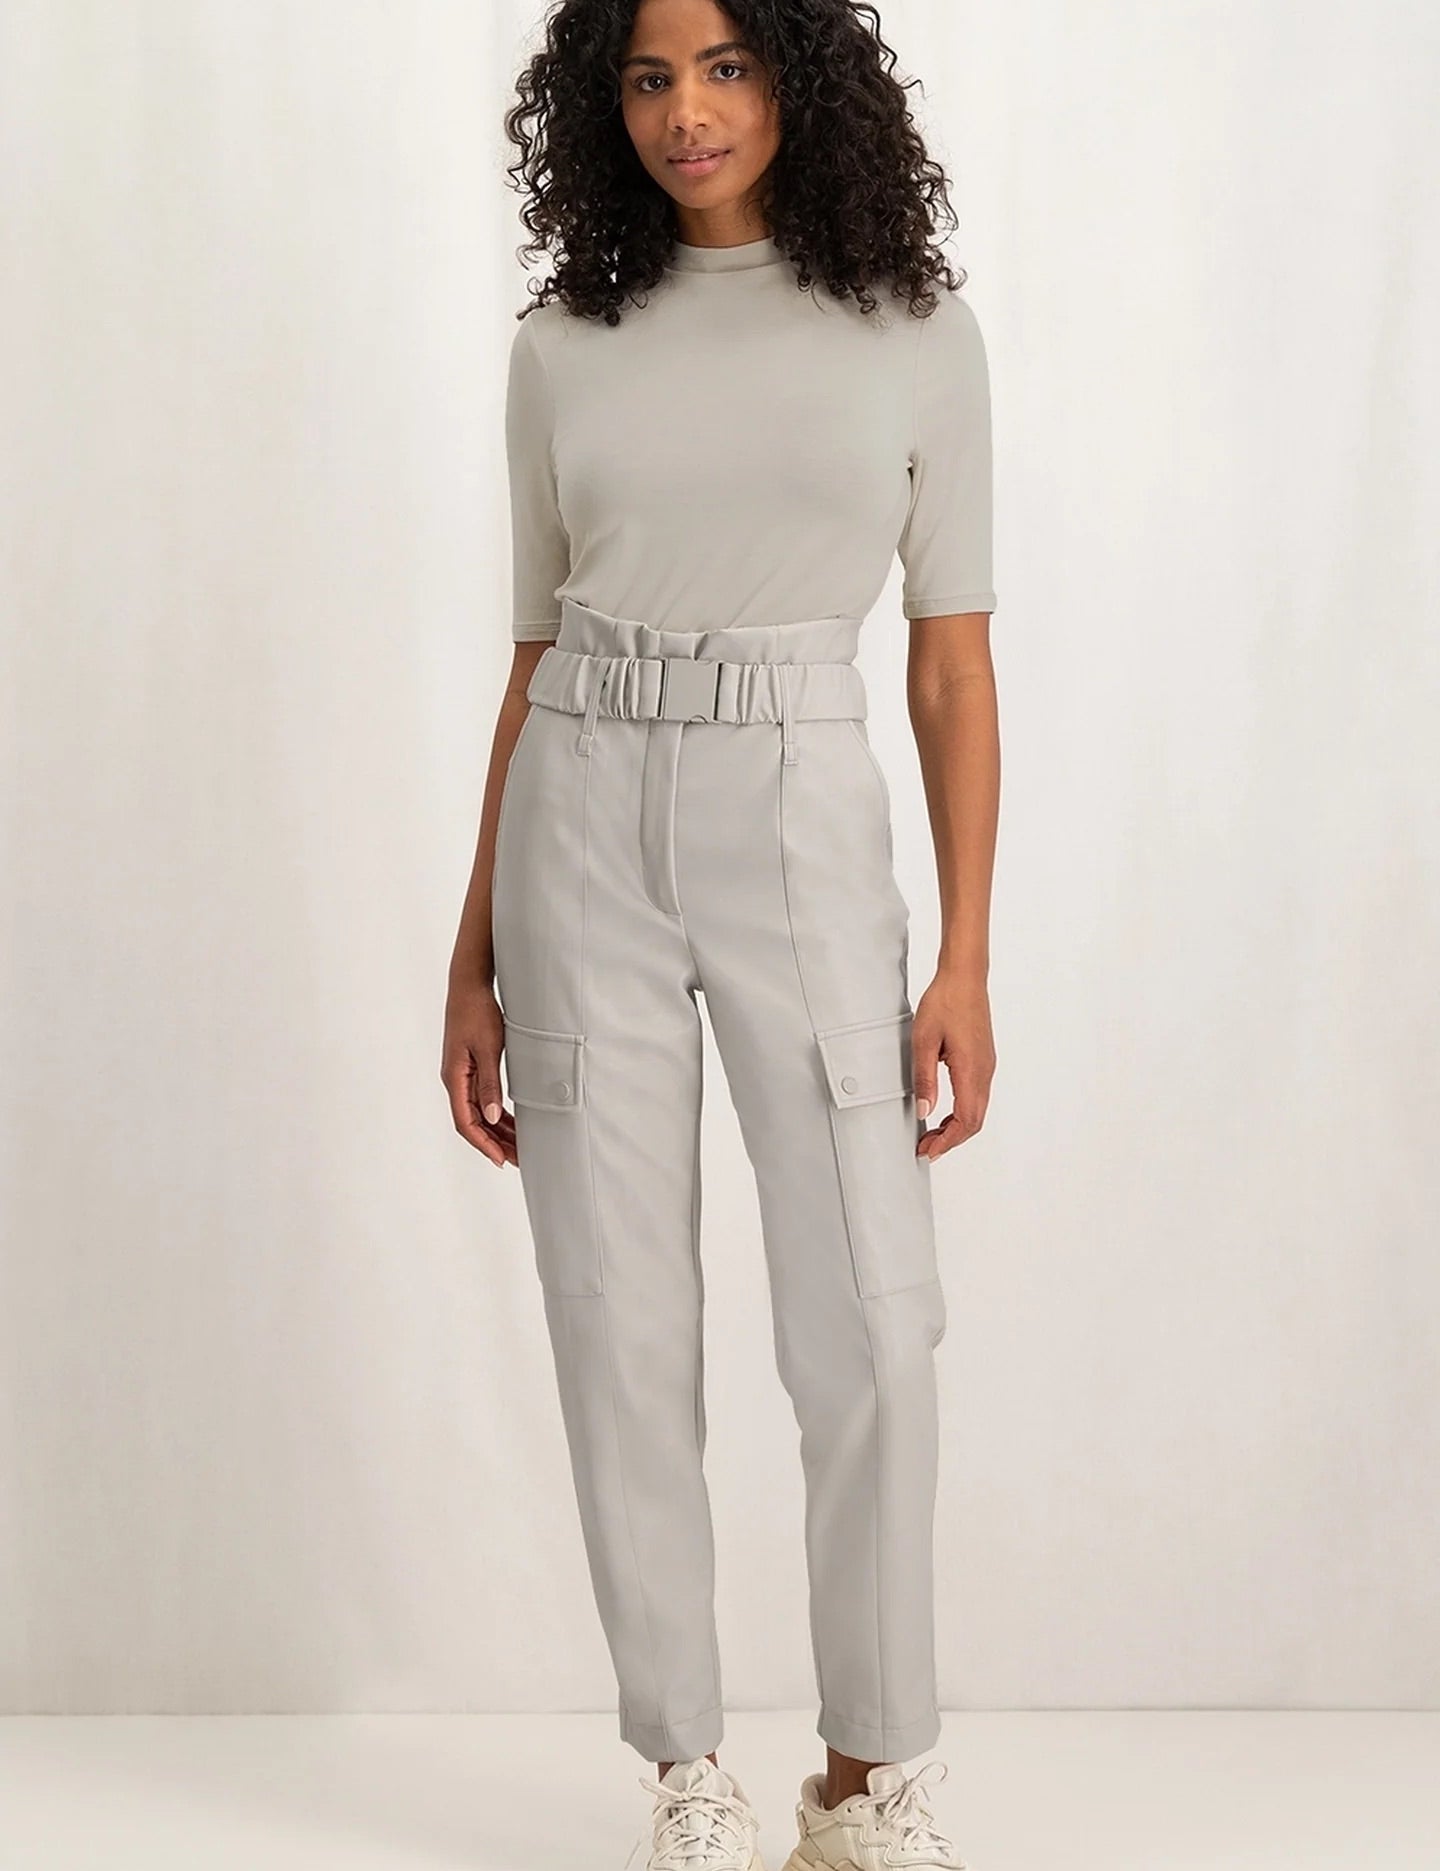 cargo-trousers-with-straight-legs-and-belt-in-faux-leather-silver-lining-beige_c019e34a-c7ee-43b9-91de-07d7c371ad25_2880x_jpg.jpg